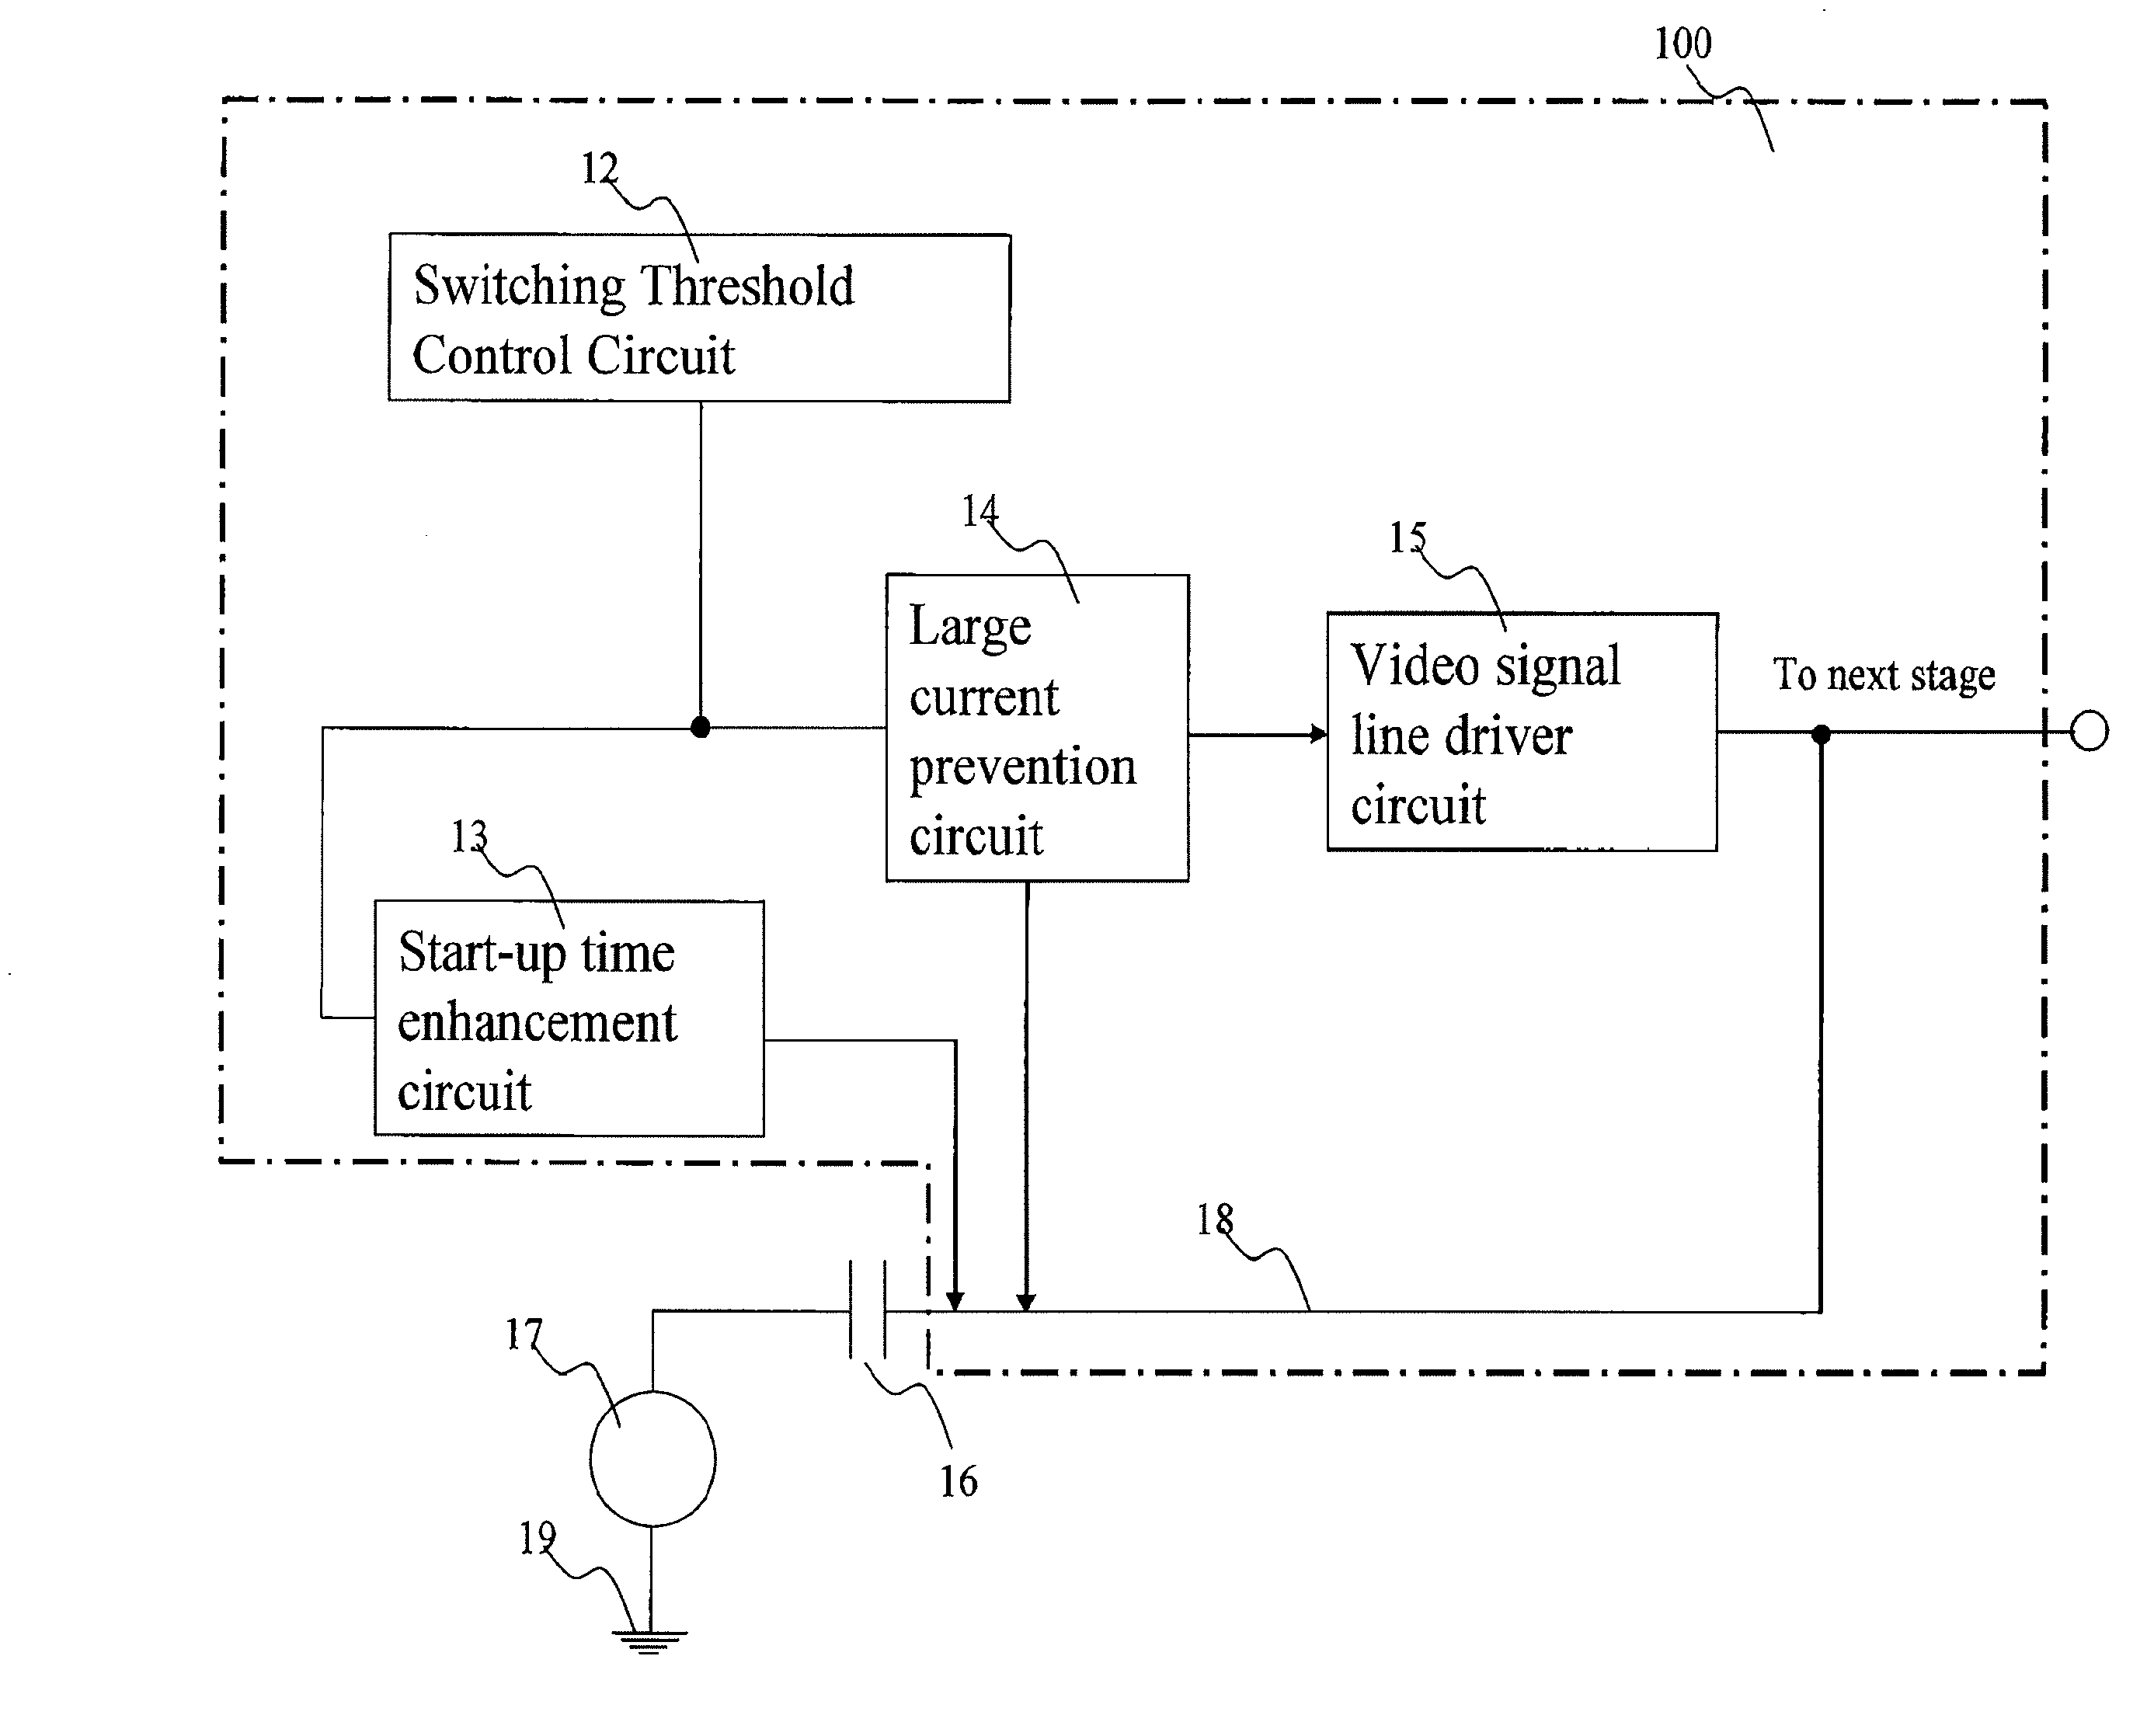 Ground detection circuit for video signal driver to prevent large clamp transistor current